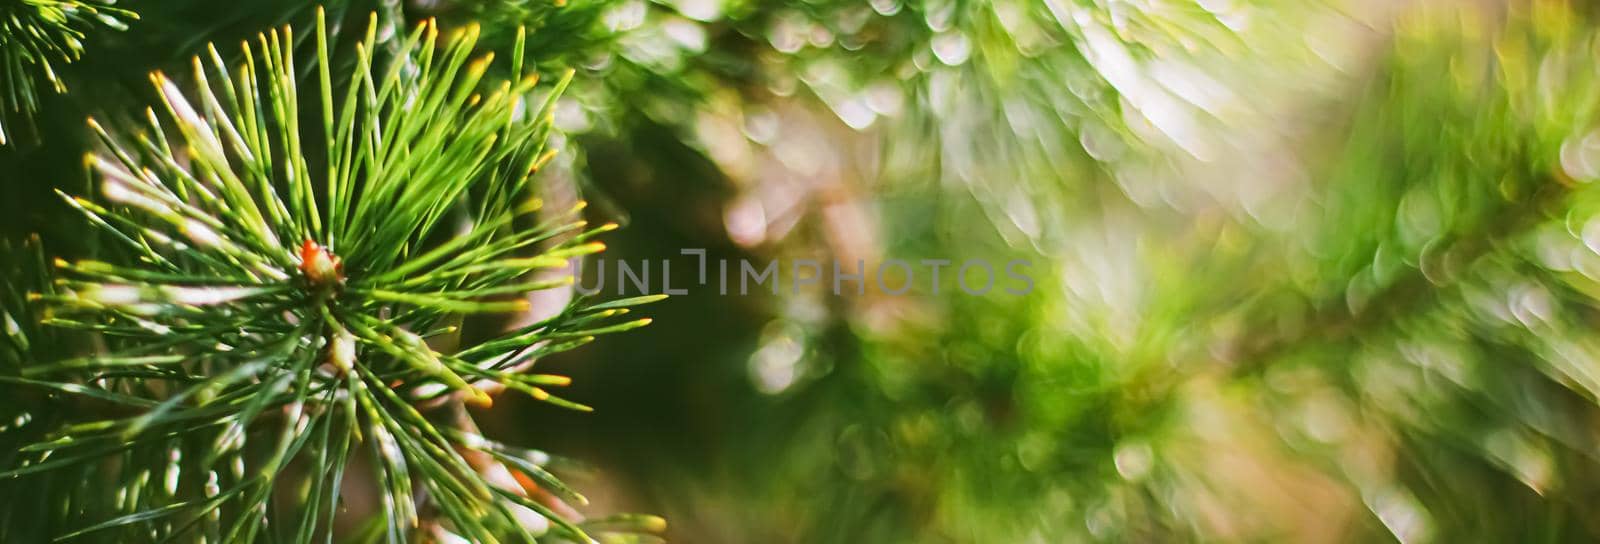 Spruce tree branches as abstract nature background and natural environment by Anneleven